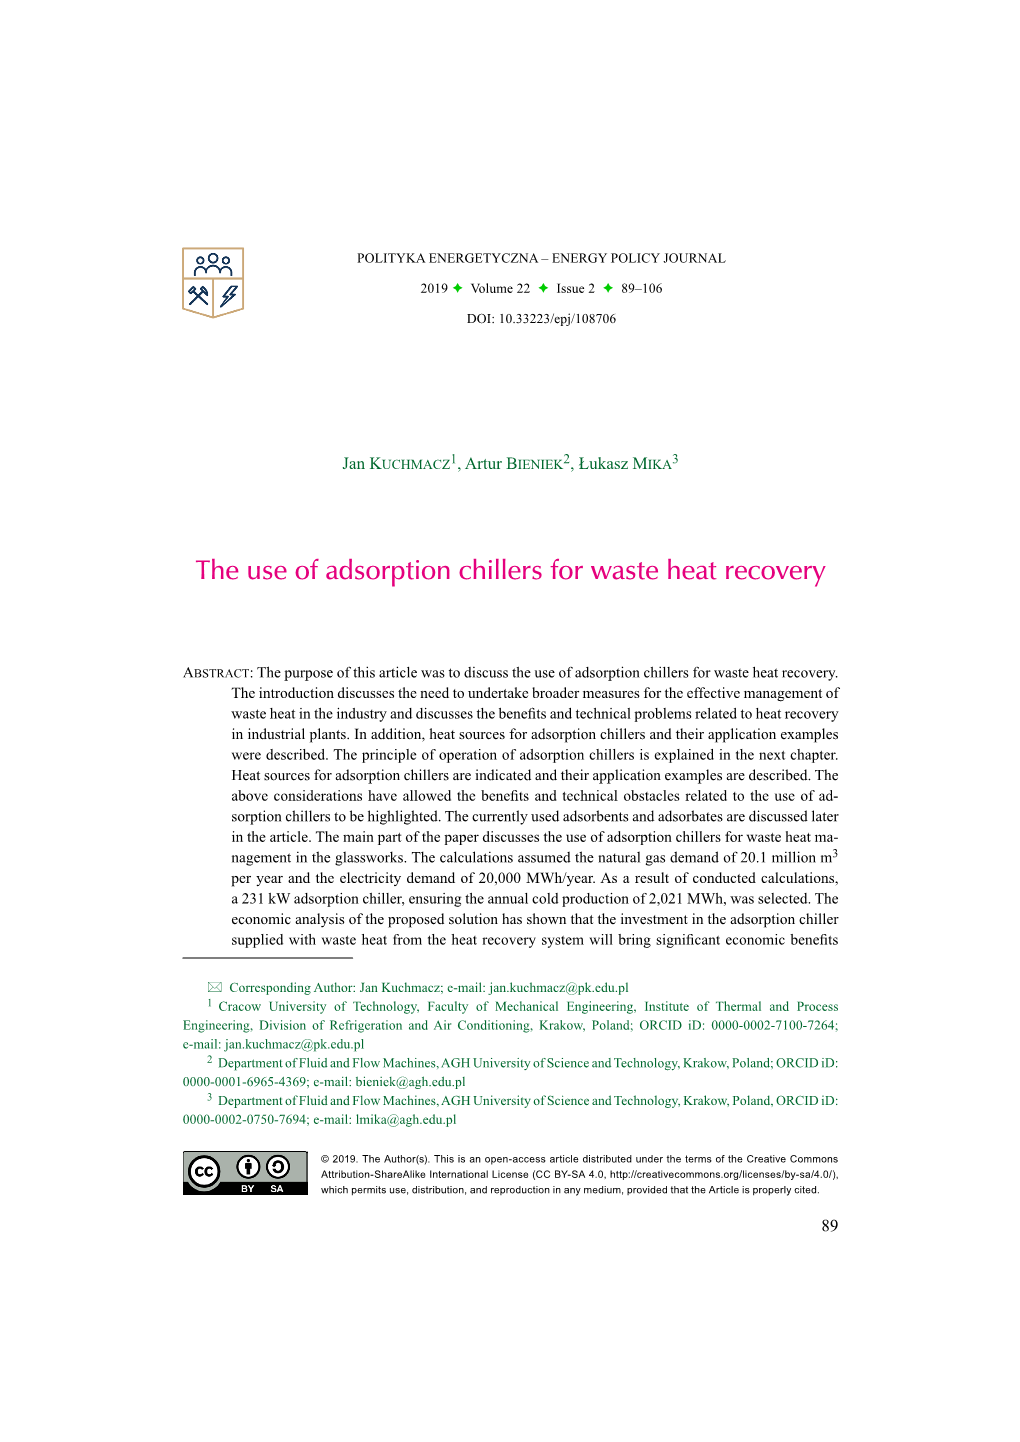 The Use of Adsorption Chillers for Waste Heat Recovery